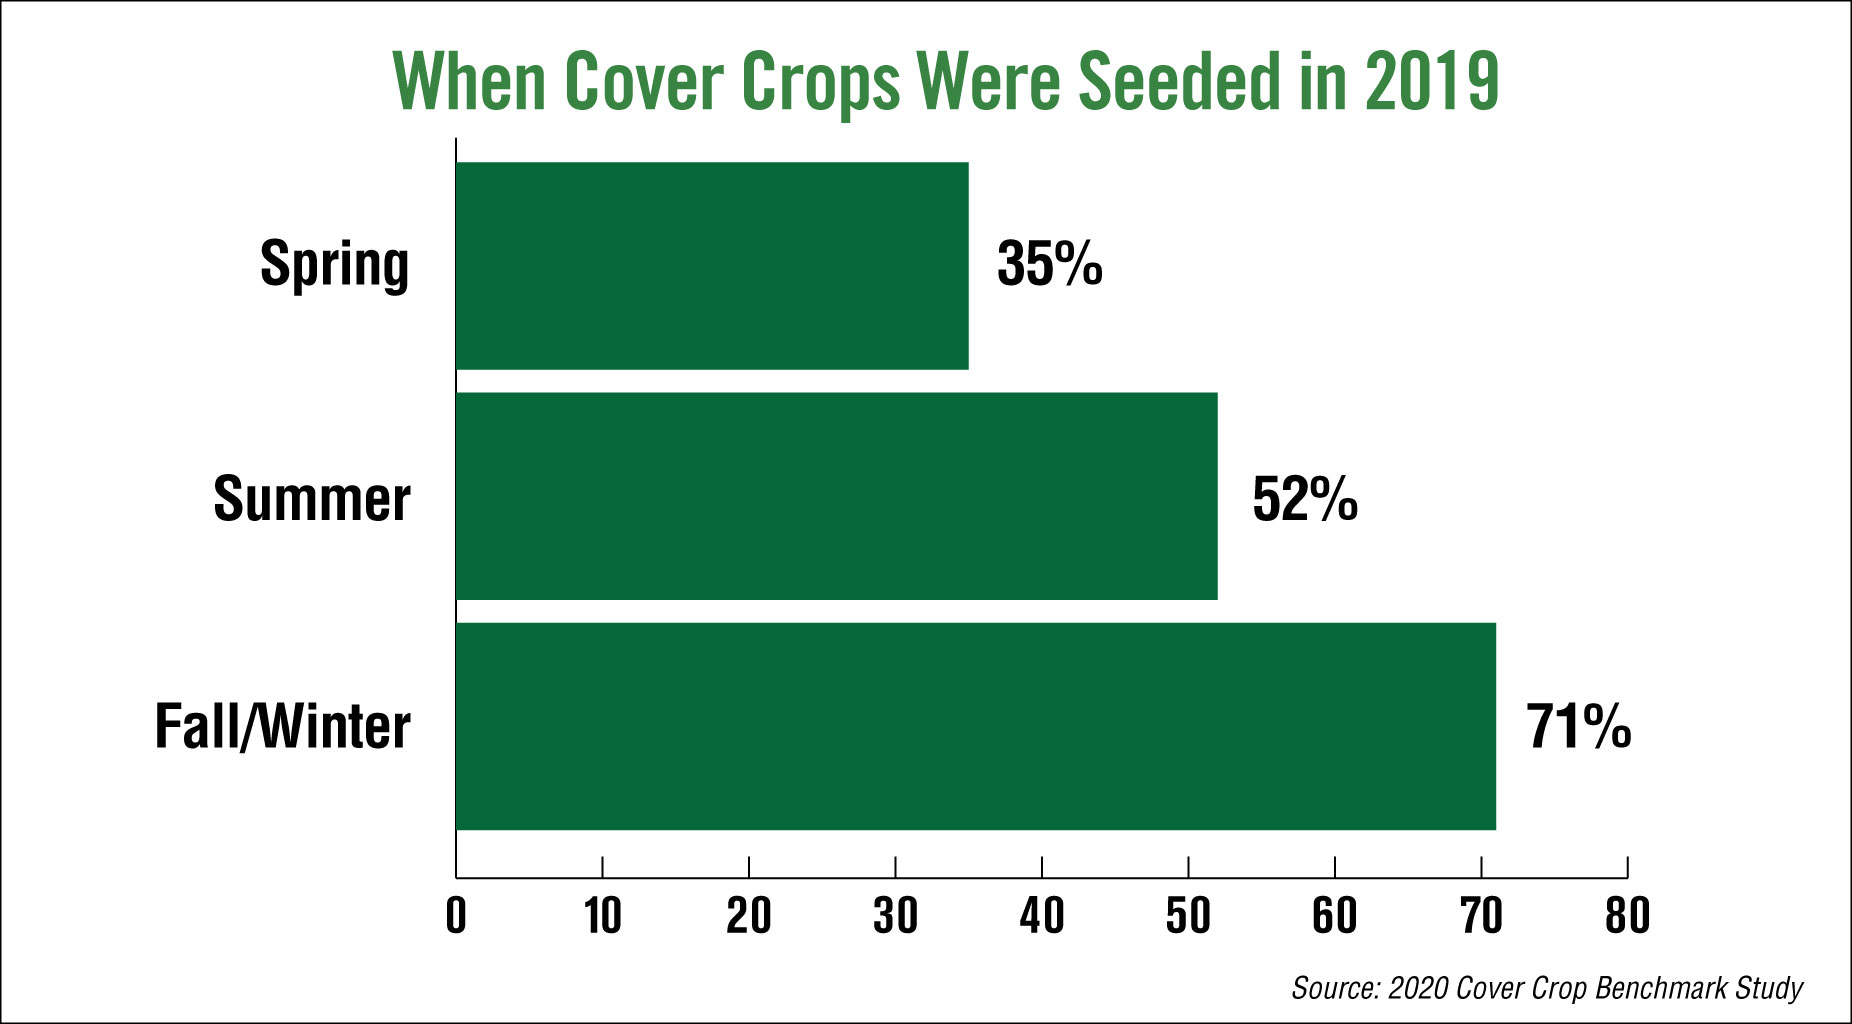 Cover crop chart